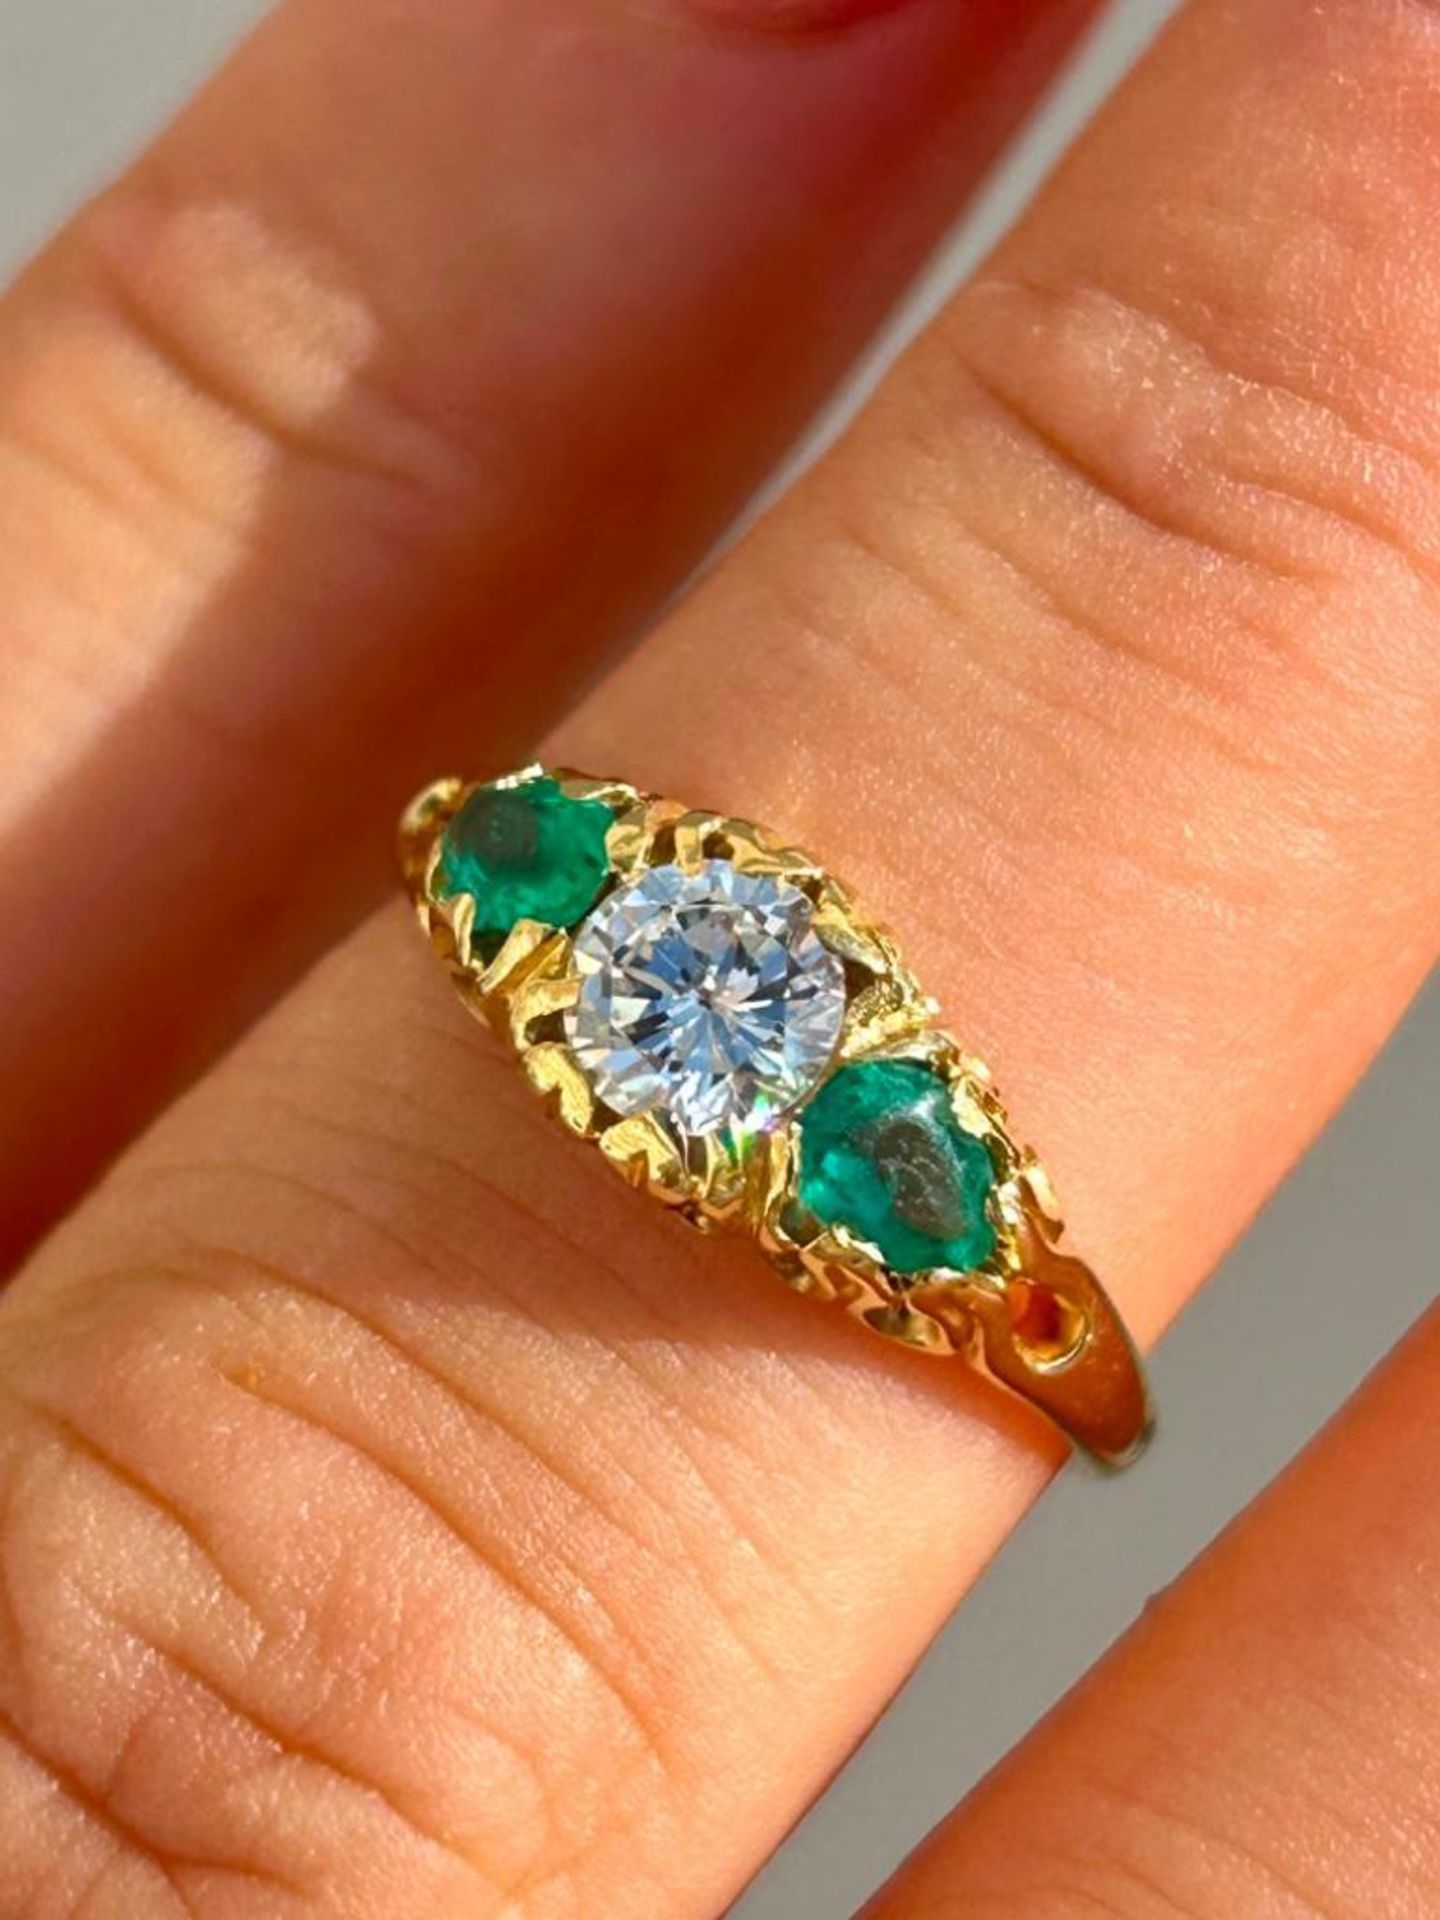 Antique 18ct Yellow Gold 3 Stone Emerald and Diamond Ring - Image 5 of 6